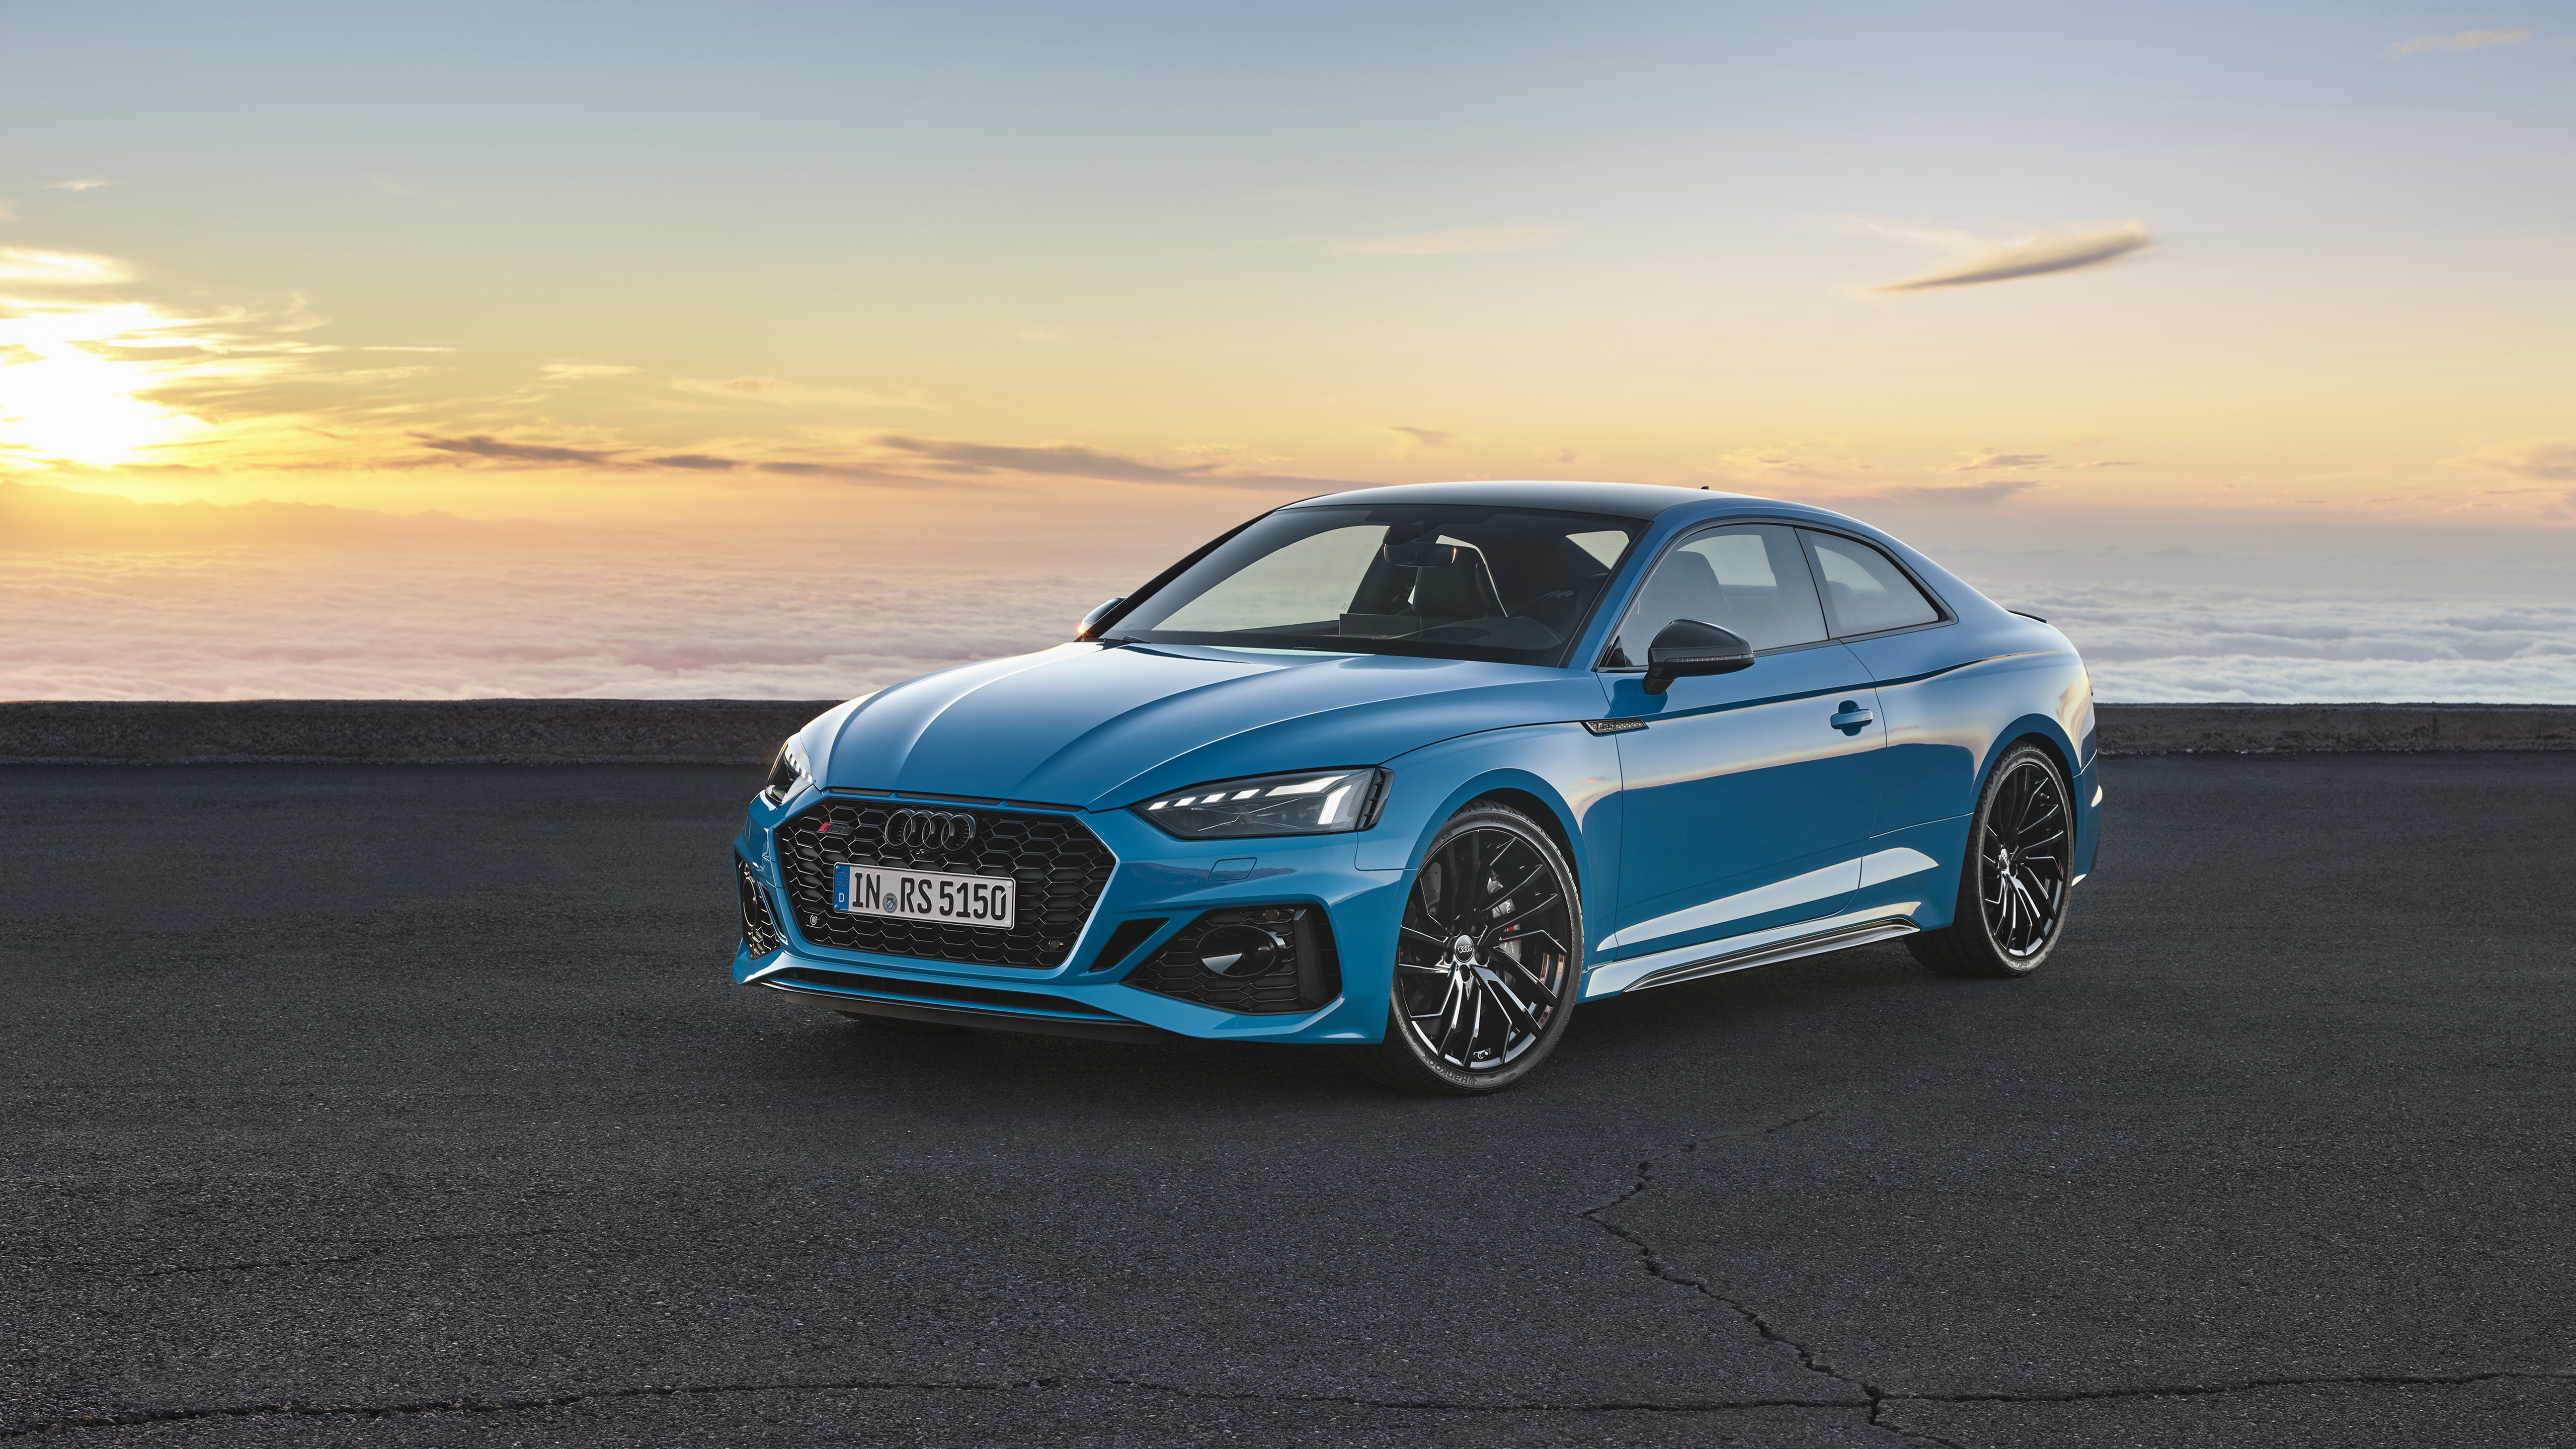 Audi RS 5 Coupe 2019 4K Wallpaper | HD Car Wallpapers | ID #13899